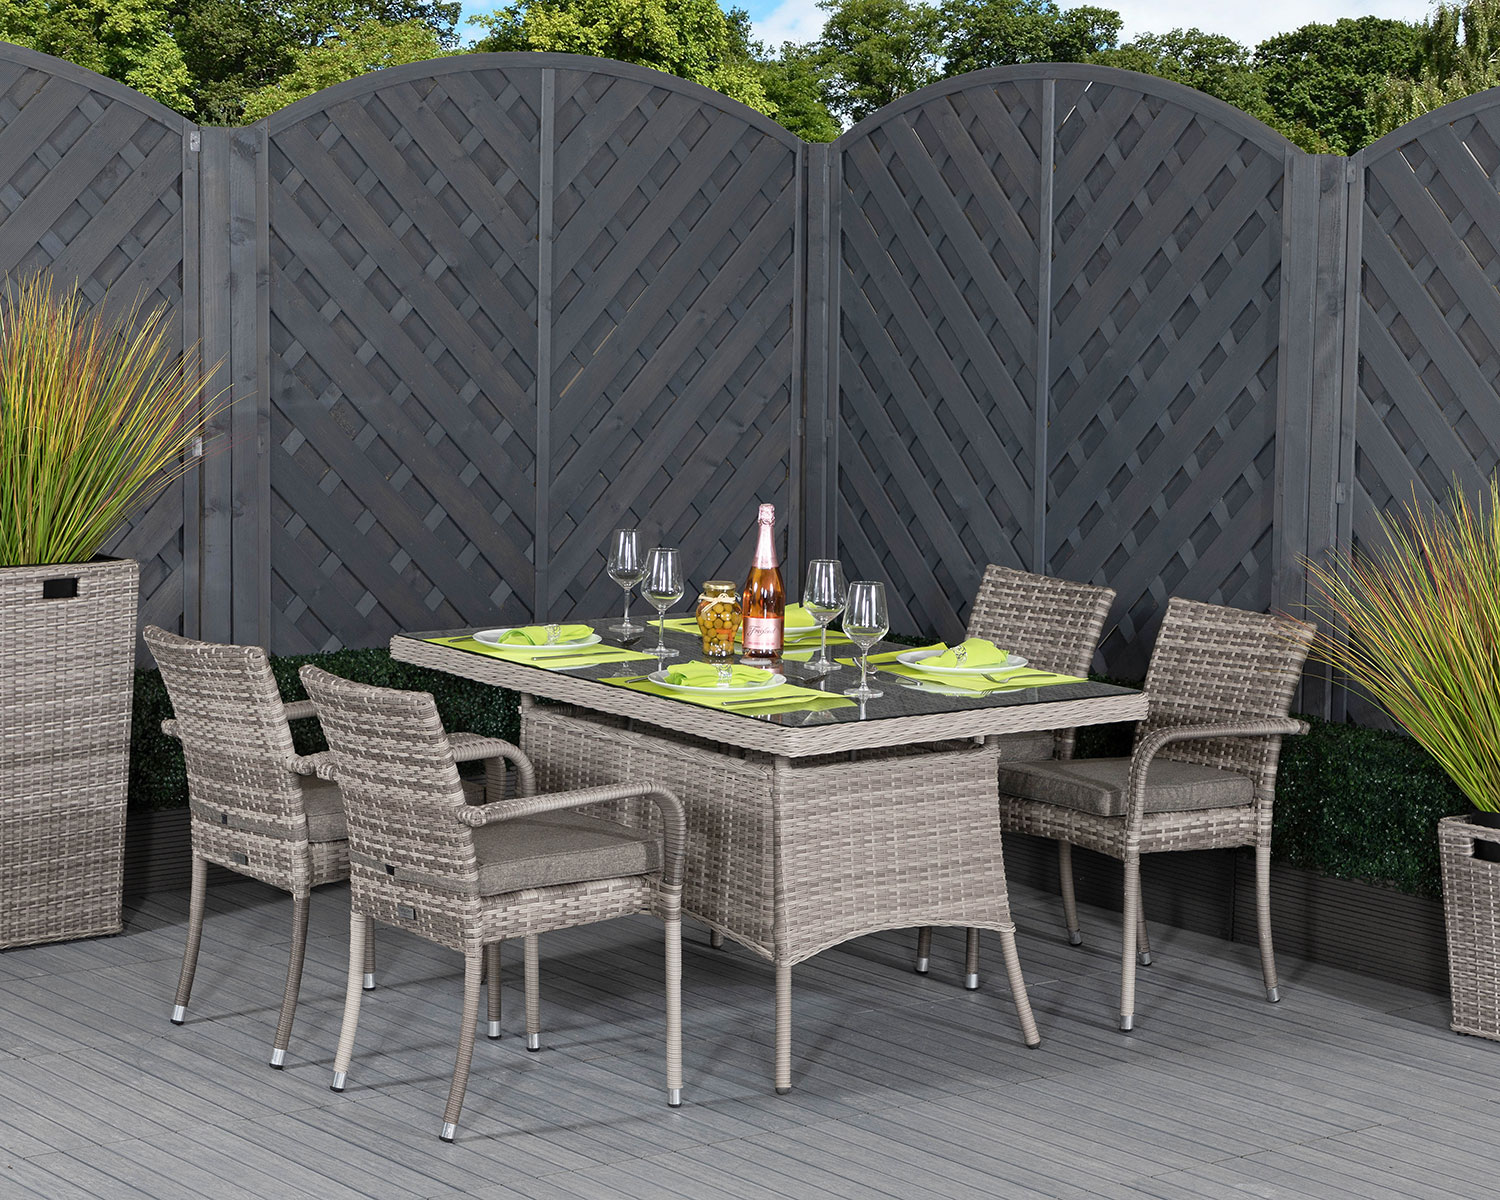 4 Seat Rattan Garden Dining Set With Small Rectangular Dining Table In Grey Roma Rattan Direct